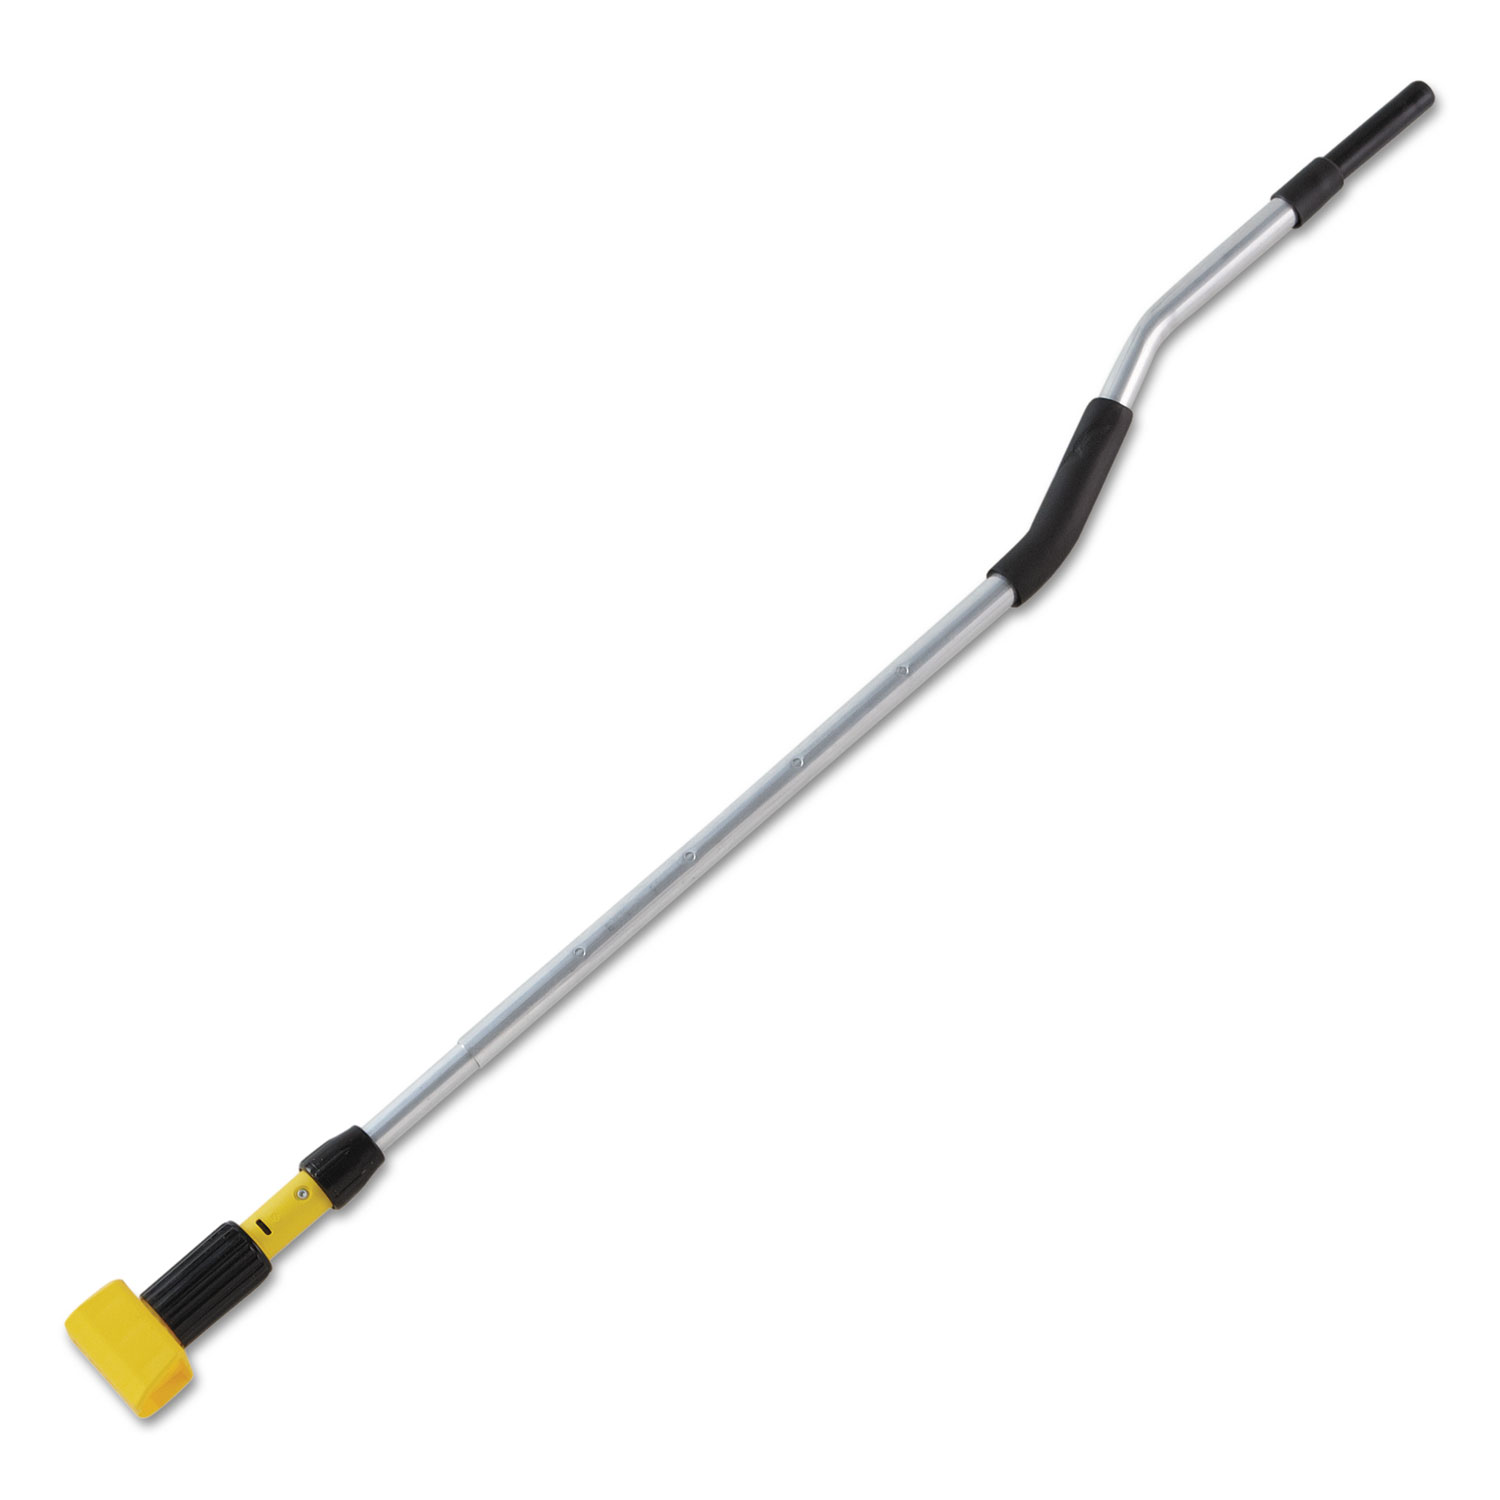 User-Friendly Mop Handle, Clamp Style, 66